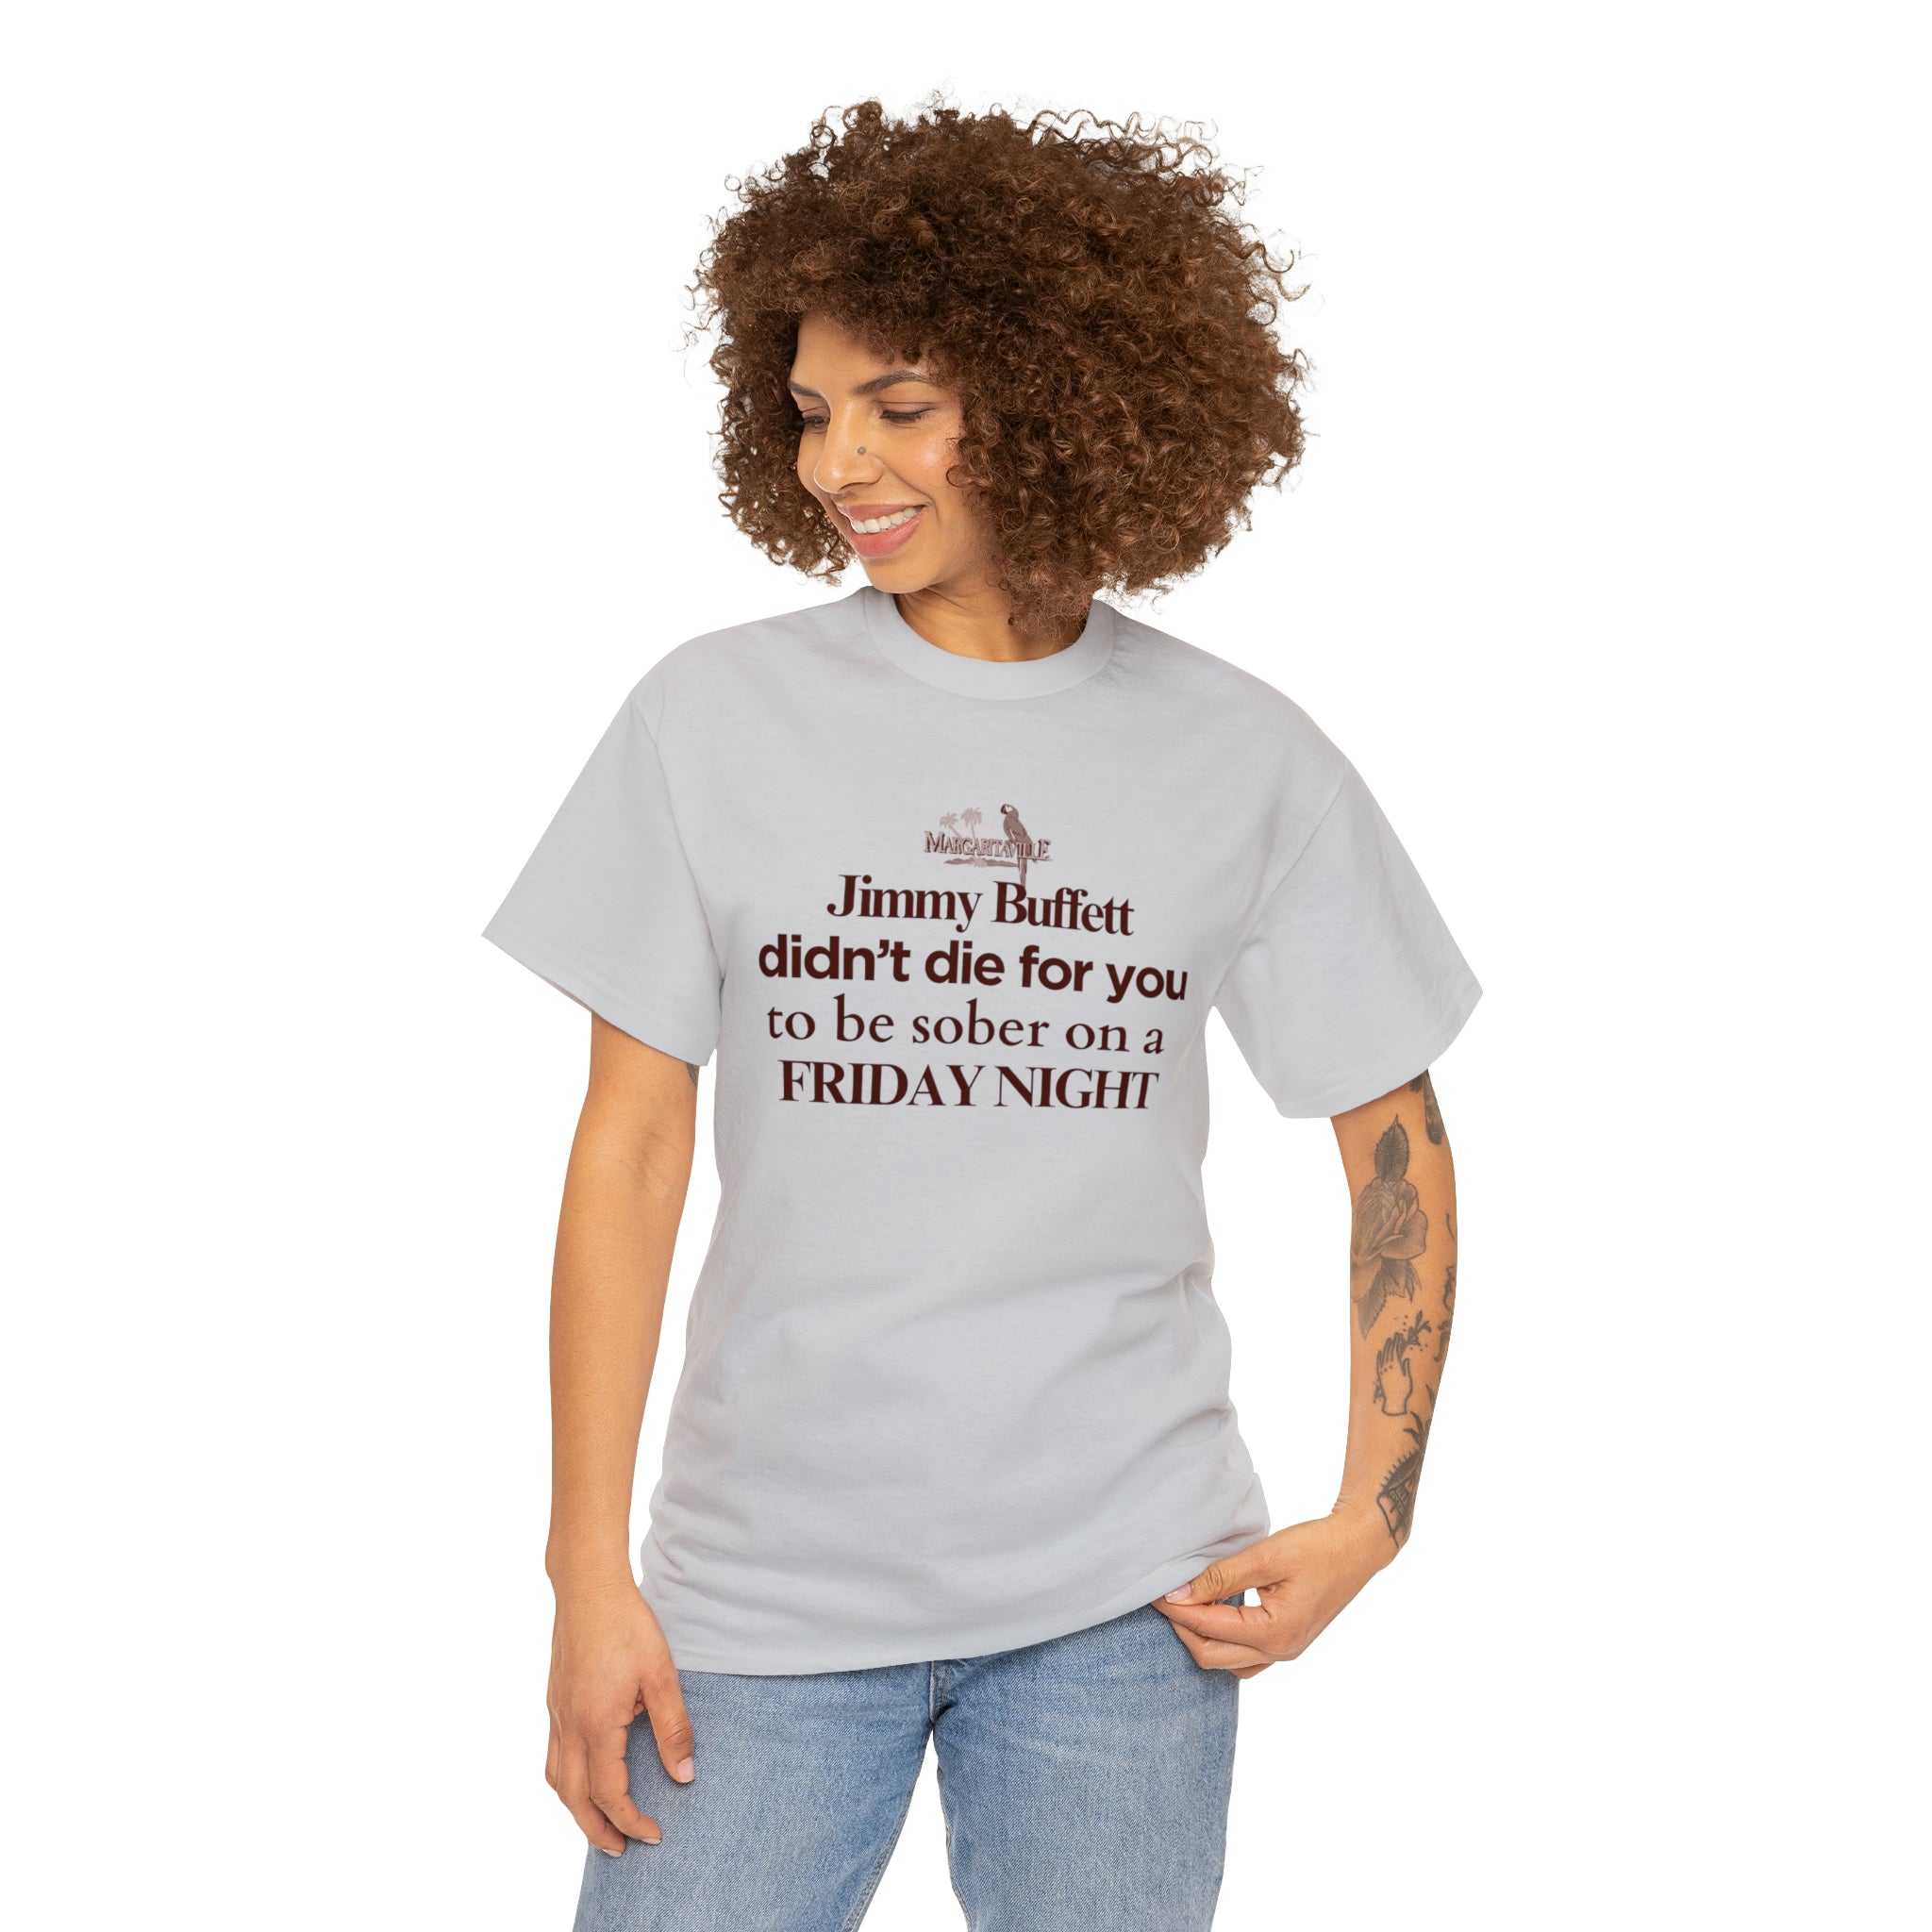 Jimmy Buffet didn't die for you to be sober on a friday night - Unisex Heavy Cotton Tee